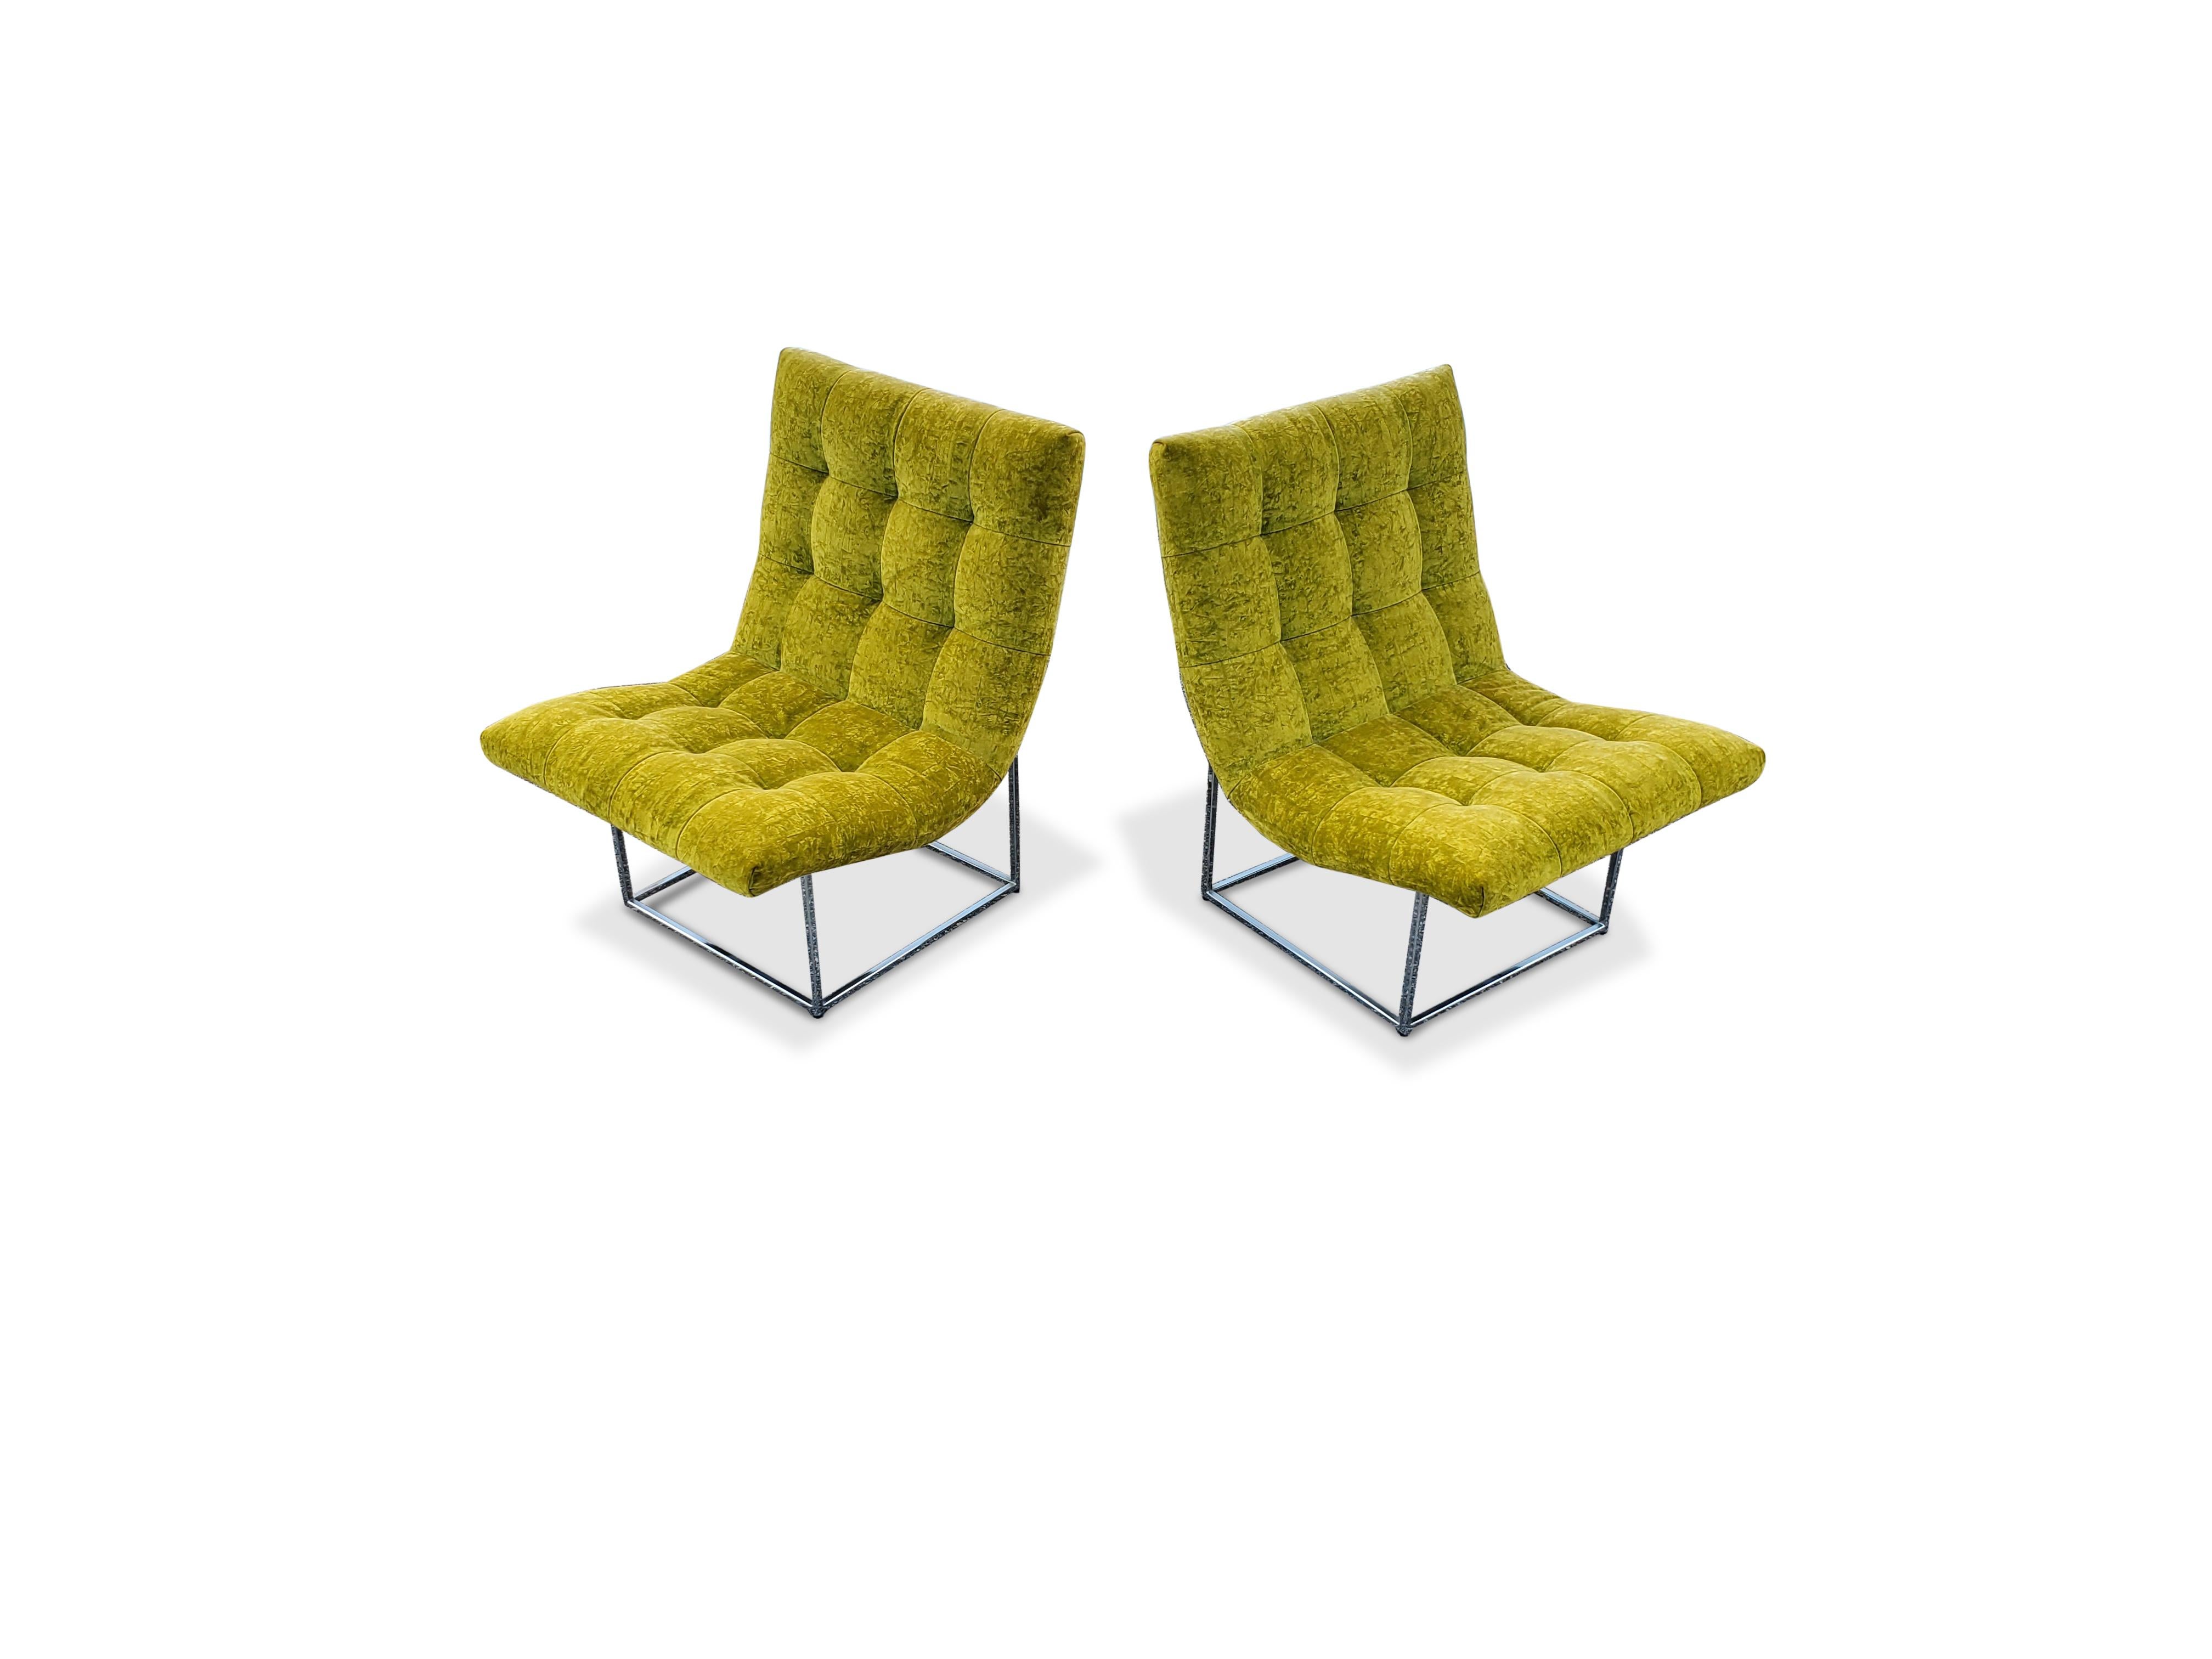 North American Pair of Milo Baughman for Thayer Coggin Scoop Lounge Chairs For Sale